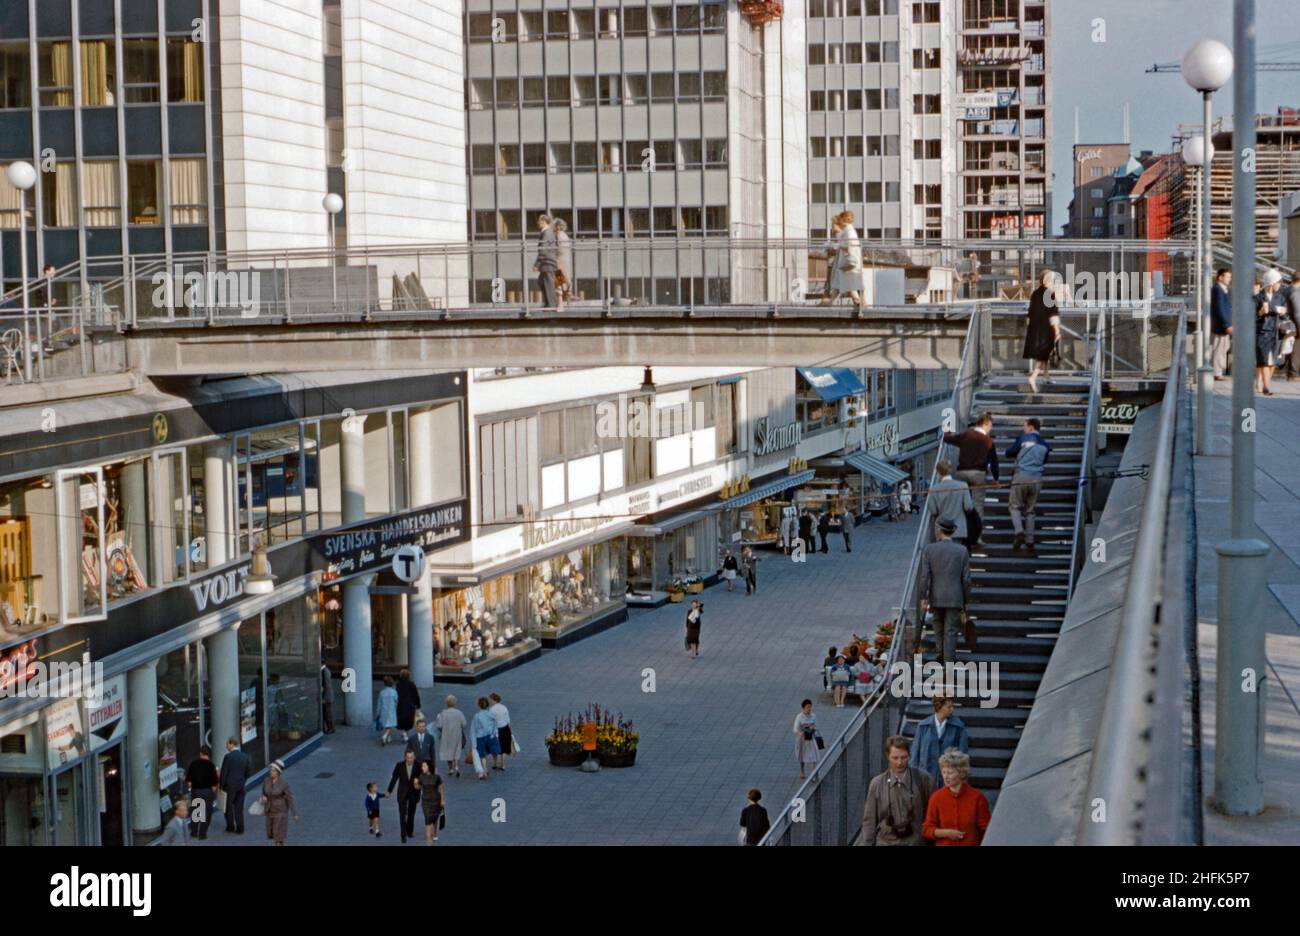 A view of the Sergelgatan pedestrian shopping precinct below the Hötorget buildings (on the left) in the central Norrmalm district, Stockholm, Sweden in the 1960s. The pedestrian footbridge over the shopping mall seems to have since been removed. In the background new buildings are being constructed. The Hötorget buildings are five modernist high-rise office blocks. This image is from an amateur 35mm colour transparency – a vintage 1960s photograph. Stock Photo